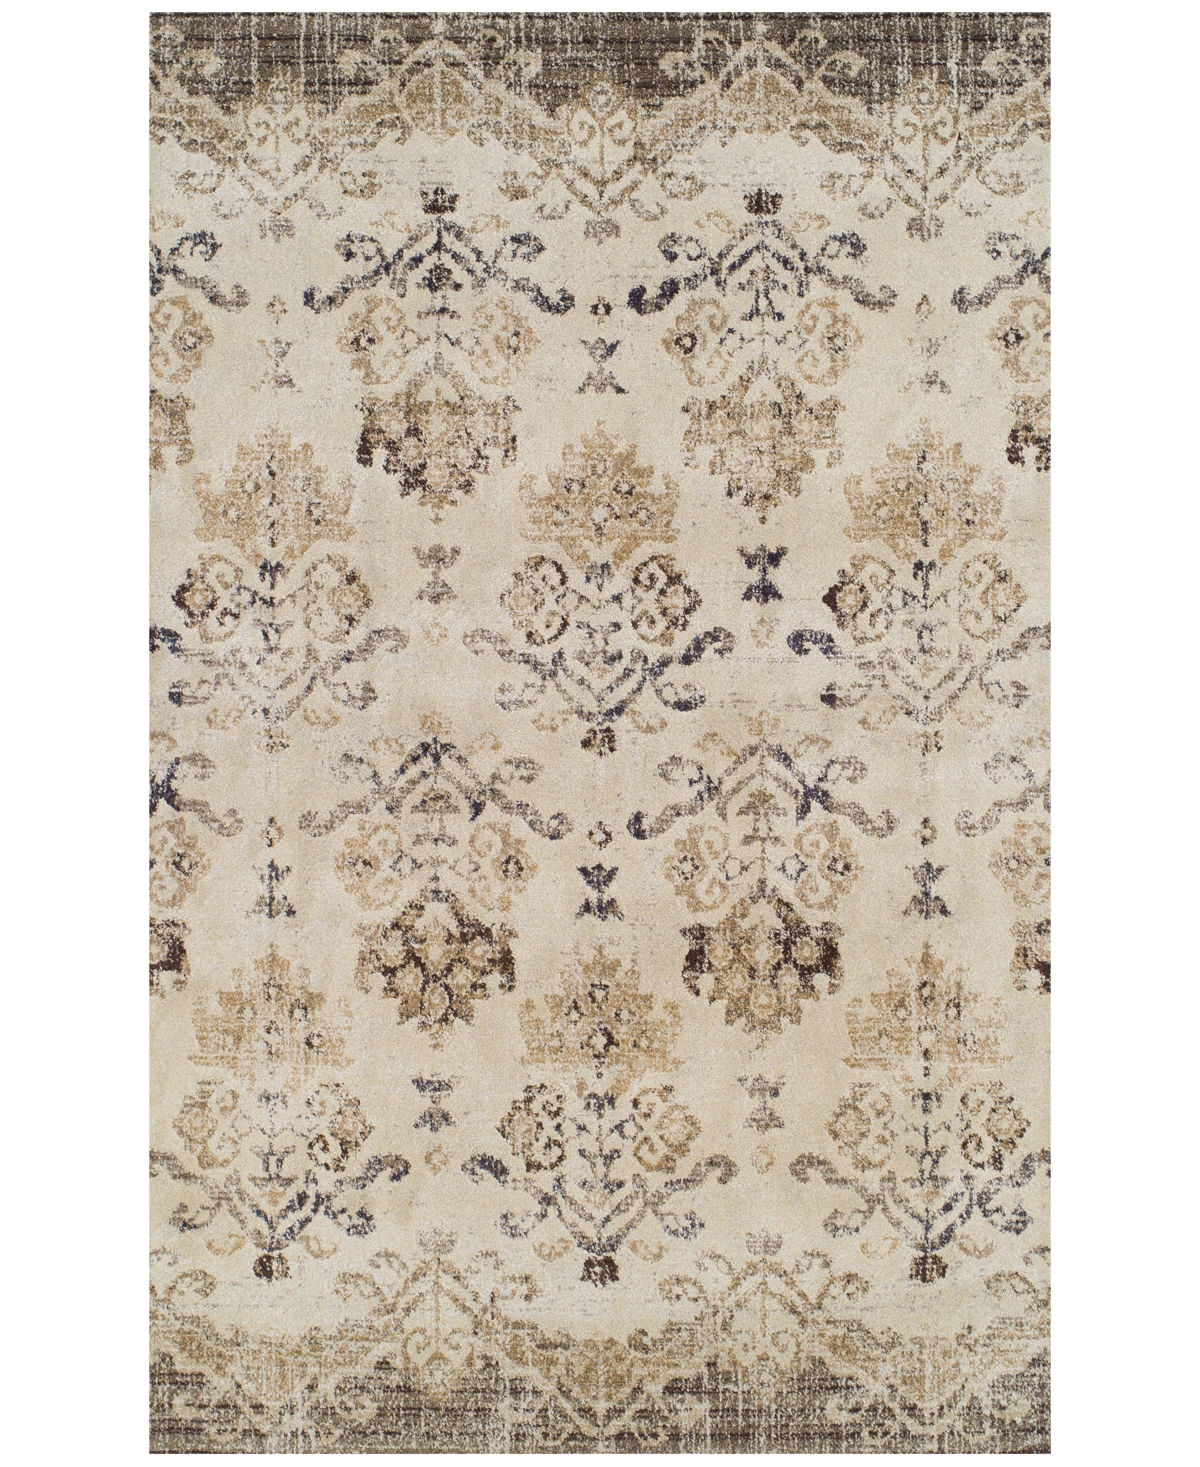 D Style Traveler Bali 7'10in x 10'7in Area Rug - Chocolate